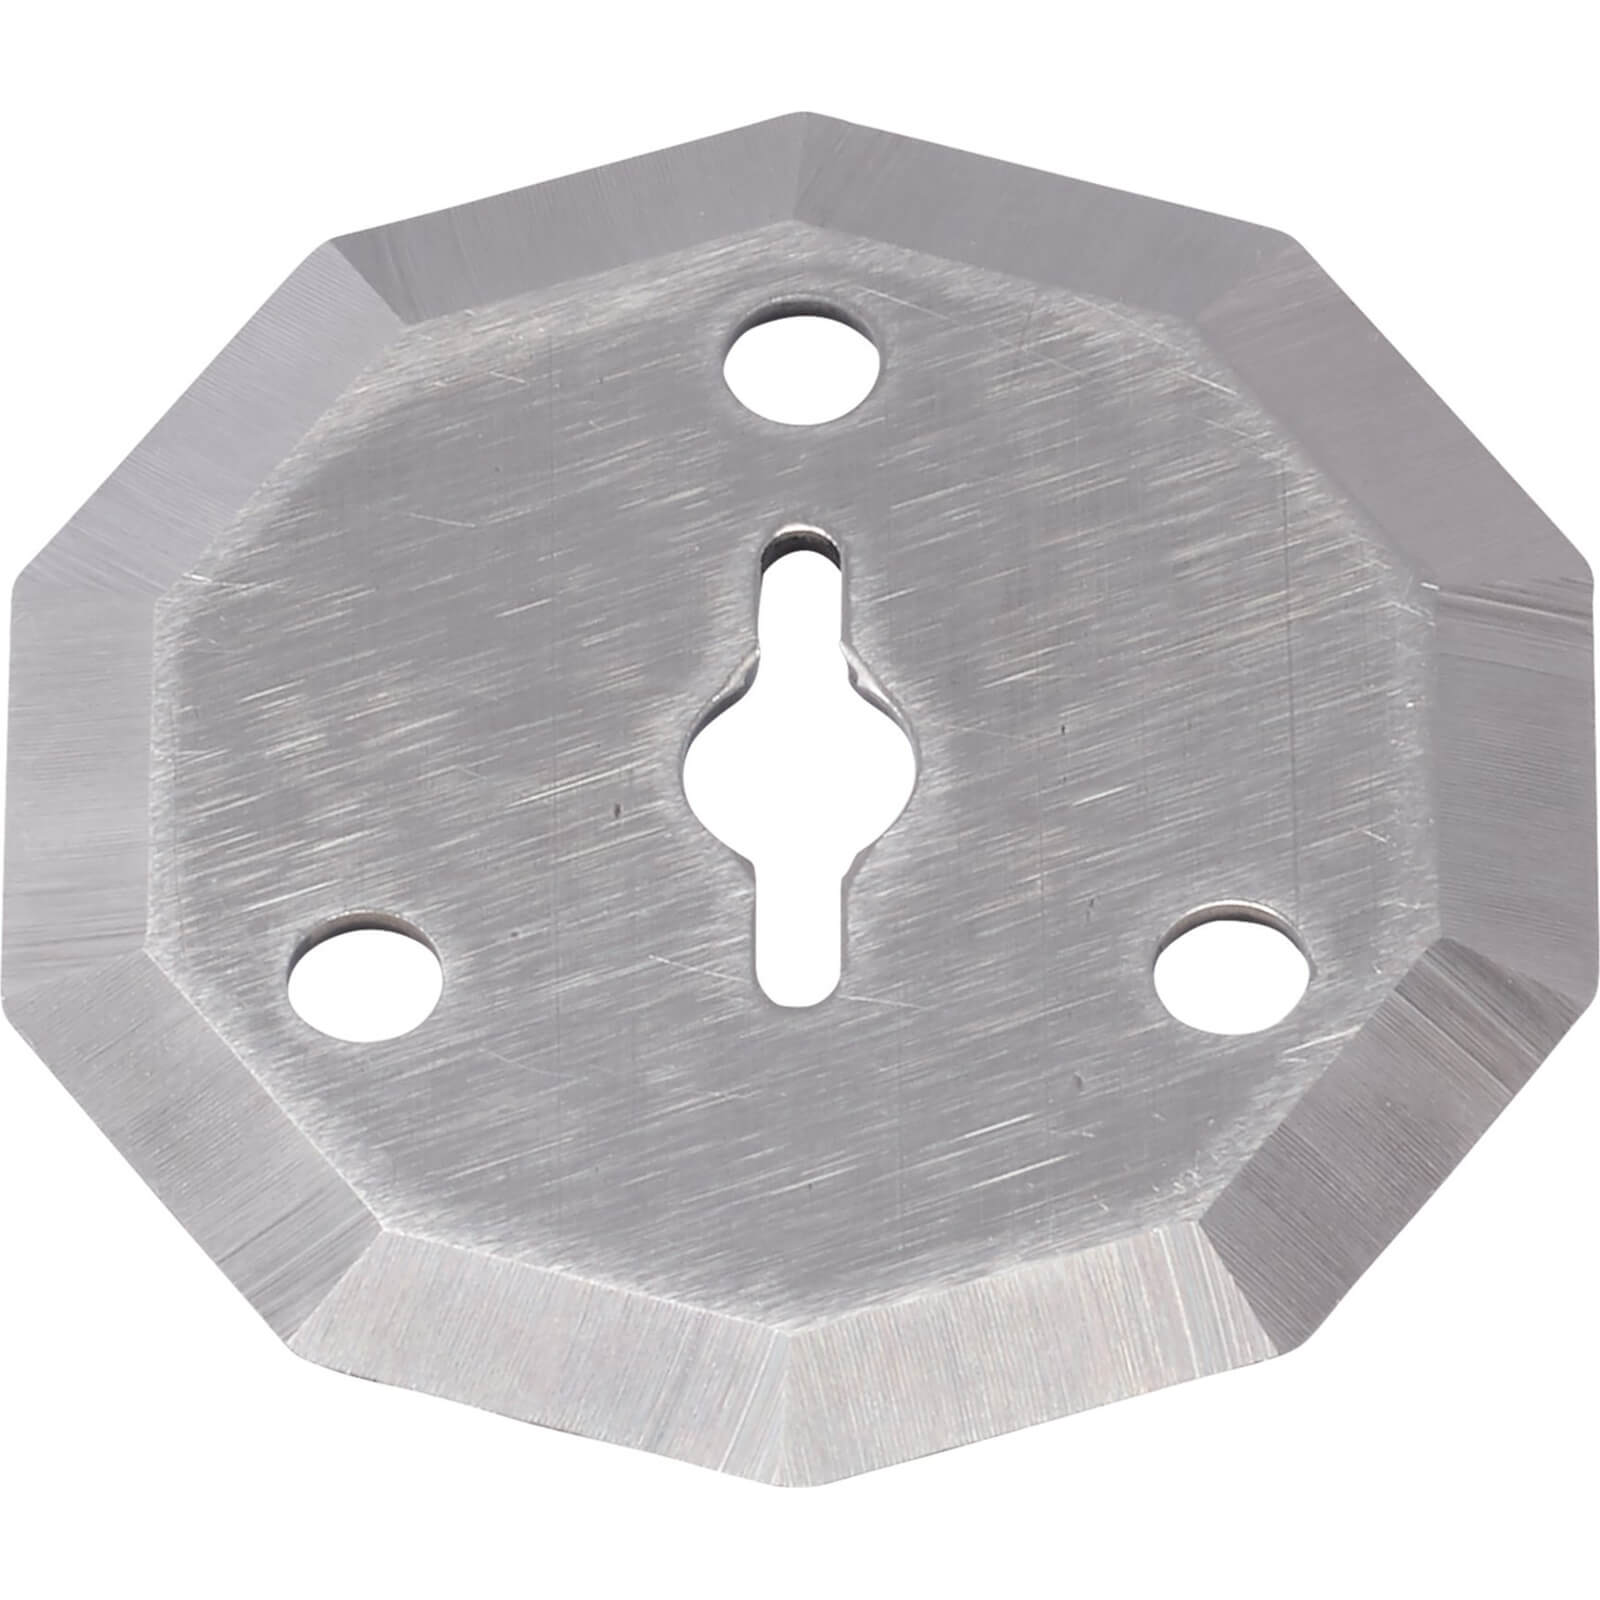 Photos - Power Tool Accessory Draper Replacement Blade for 19403 Screwdriver and Cutting Tool ACSD4MHSF 